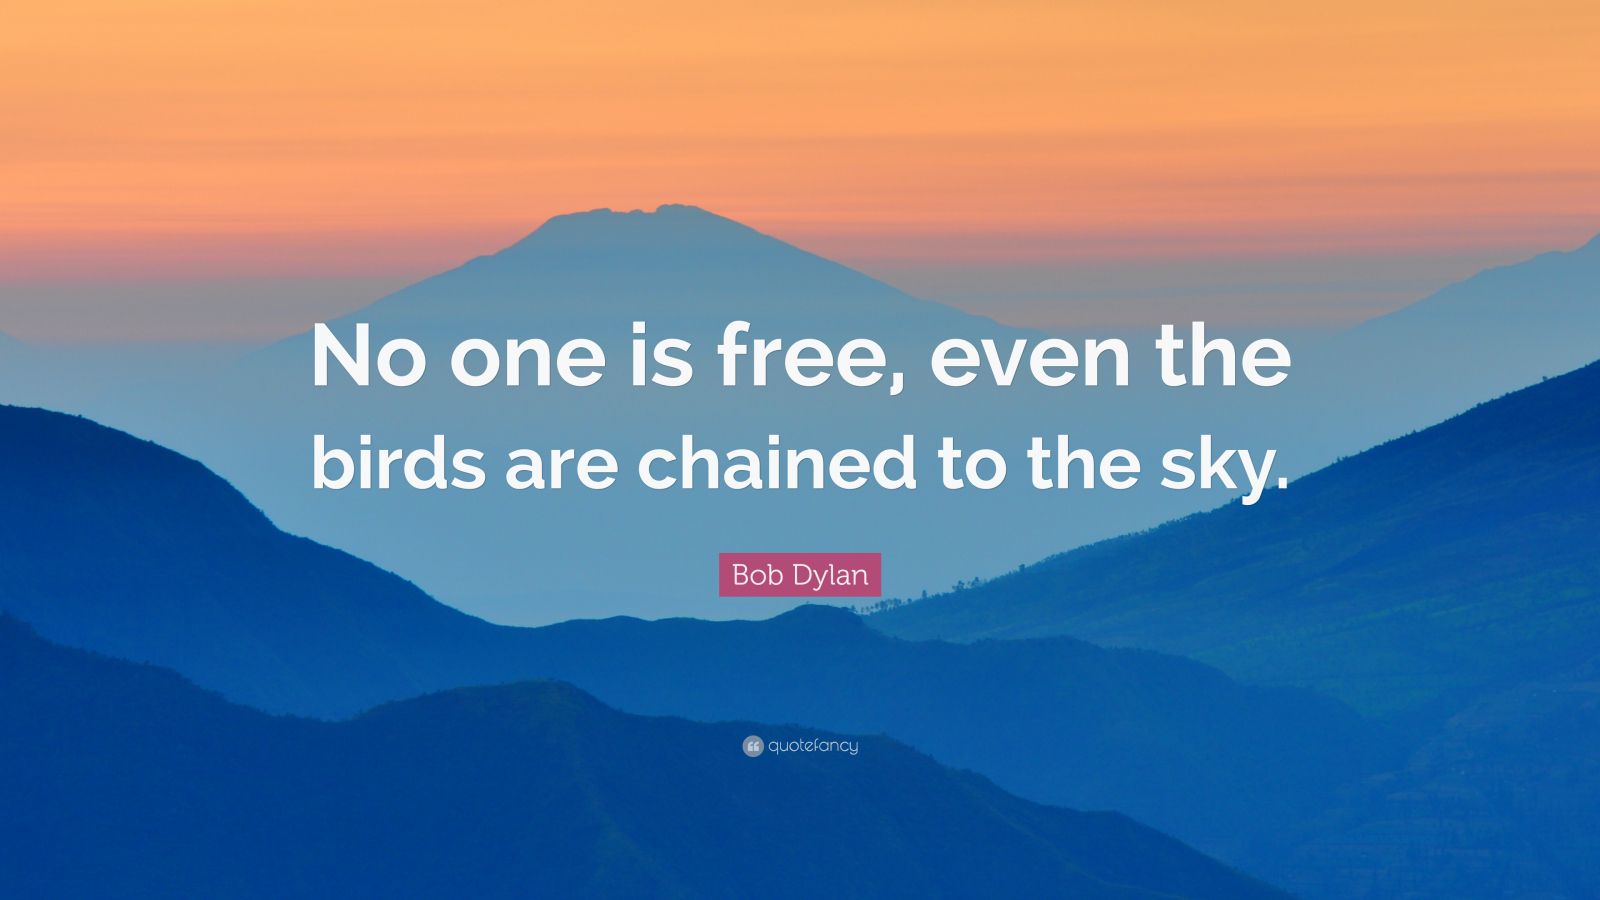 Bob Dylan Quote: “No one is free, even the birds are chained to the sky ...